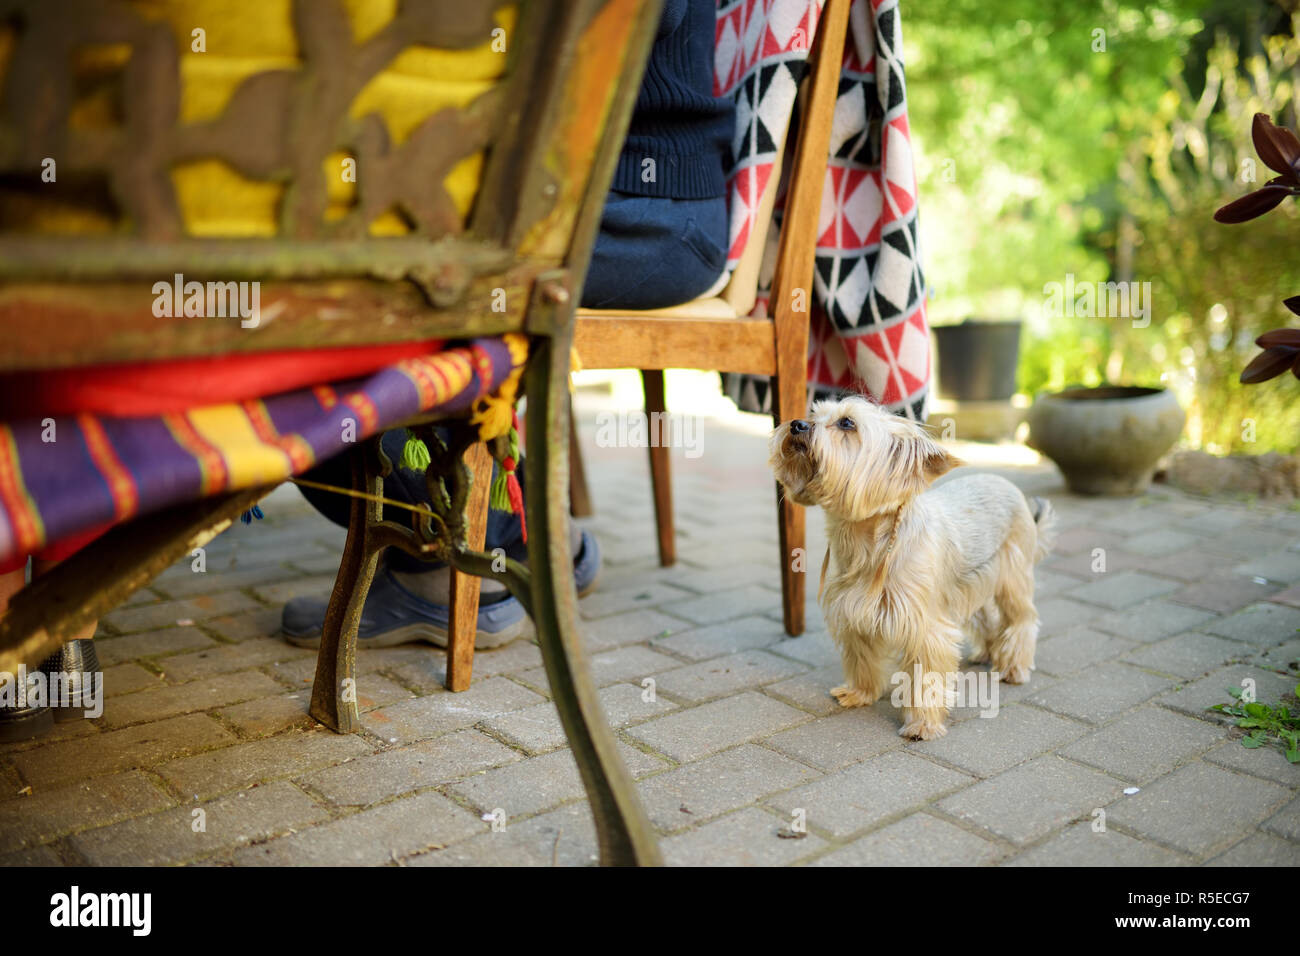 Funny yorkshire terrier dog waiting by dining table. Little puppy begging for food. Cute small pets. Stock Photo